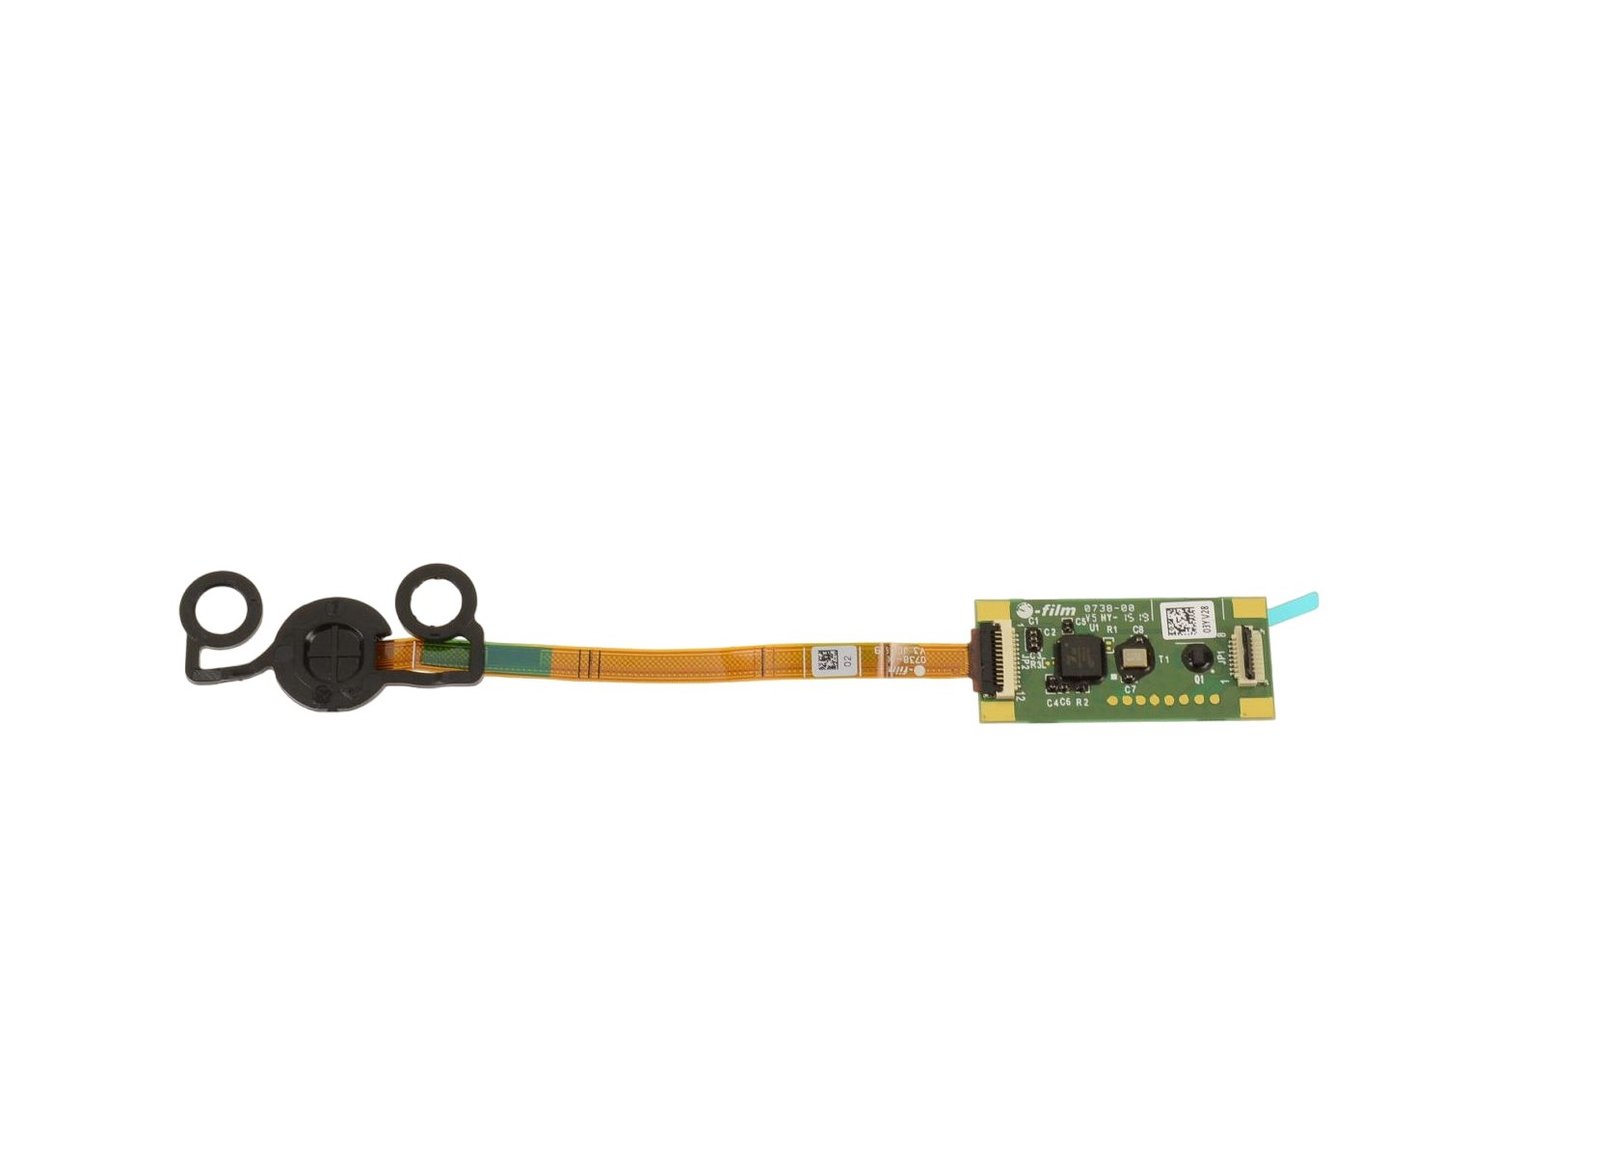 Dell G Series G3 3579 OEM Fingerprint Reader Power Button Board with Cable P/N 3YV28, 03YV28